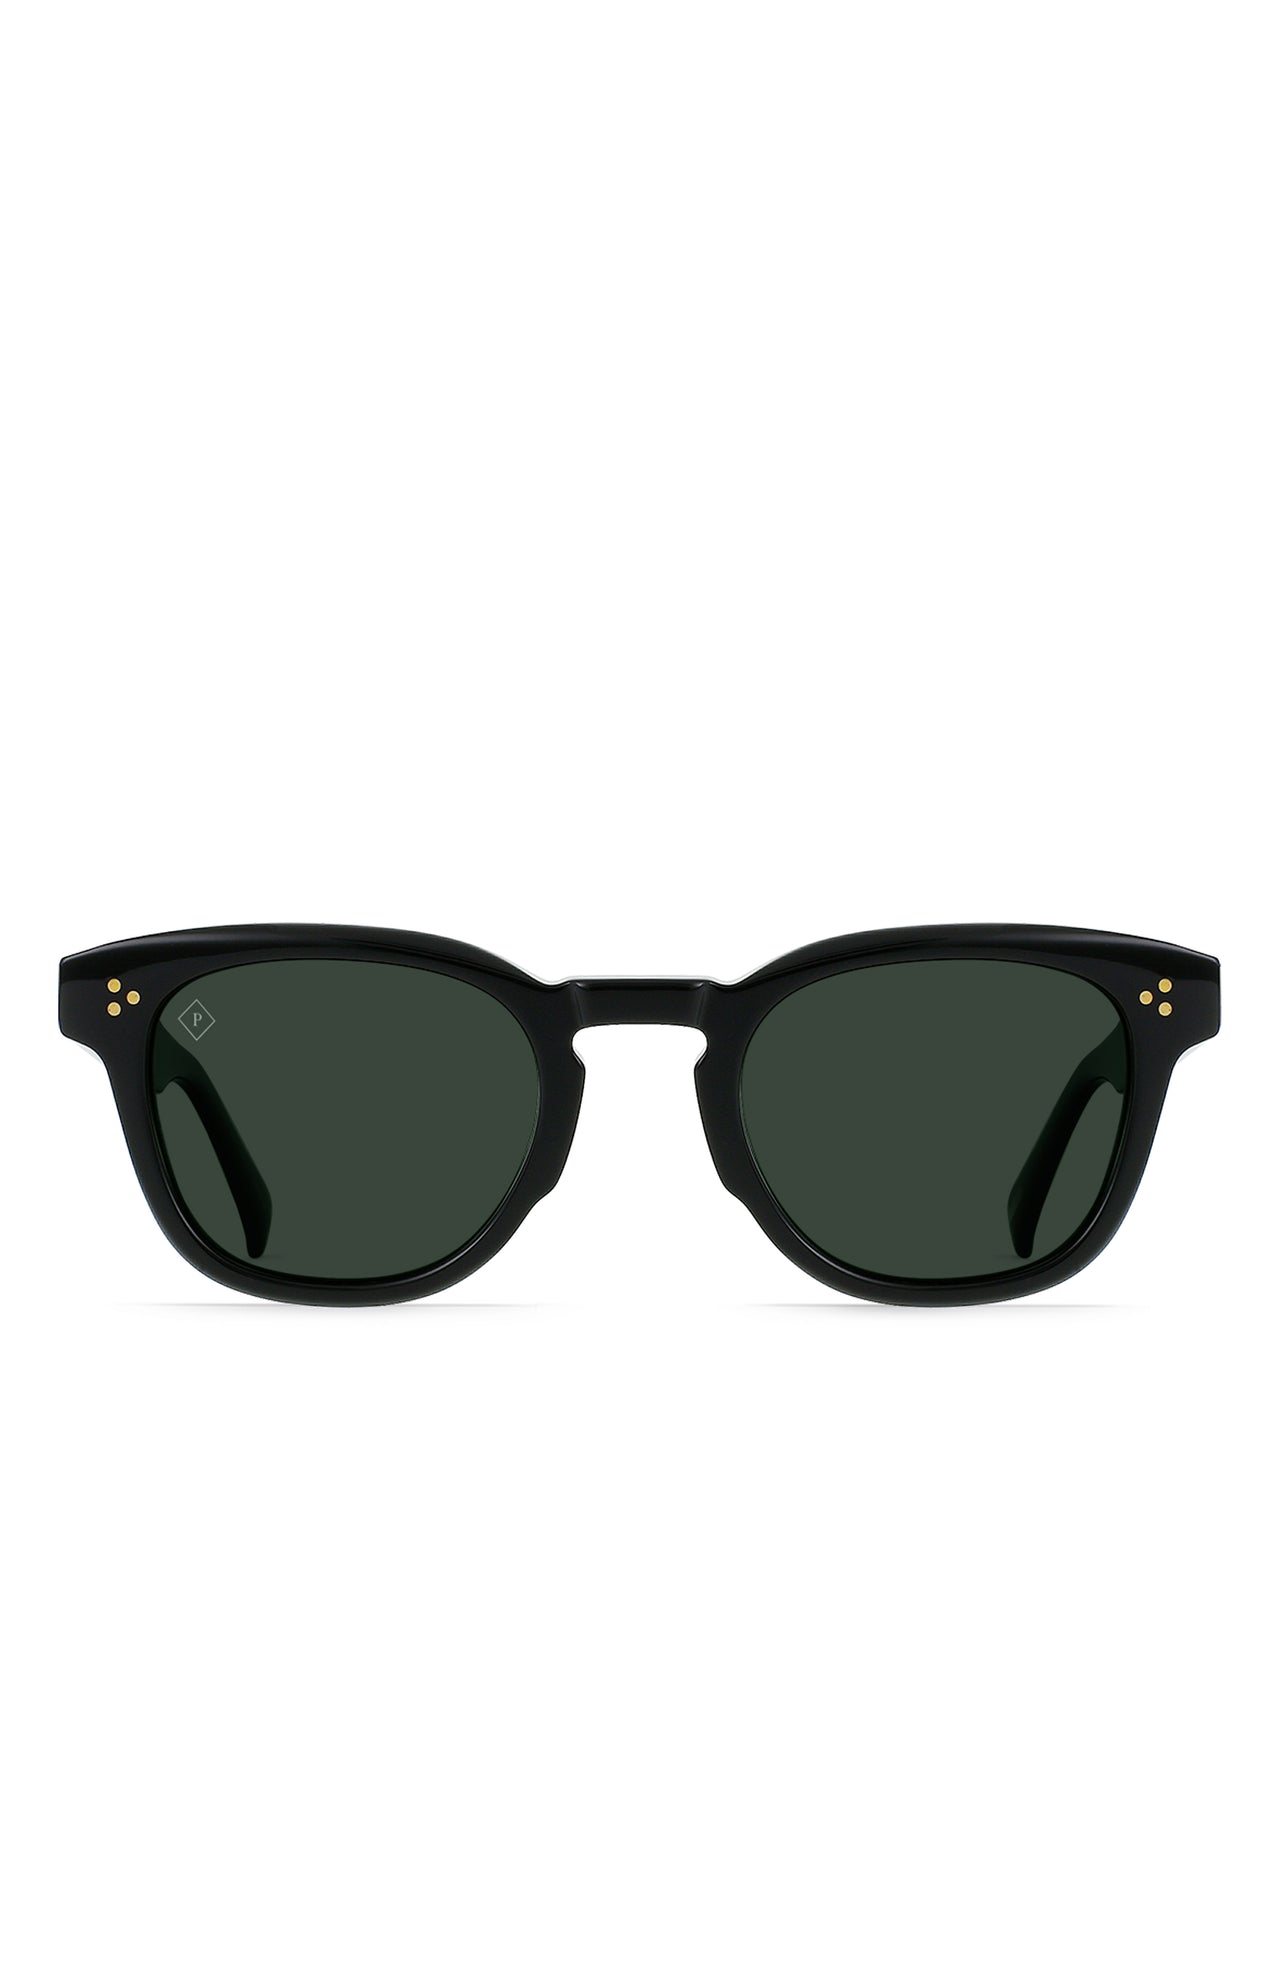 RAEN SQUIRE SUNGLASSES - RECYCLED BLACK/GREEN POLARIZED